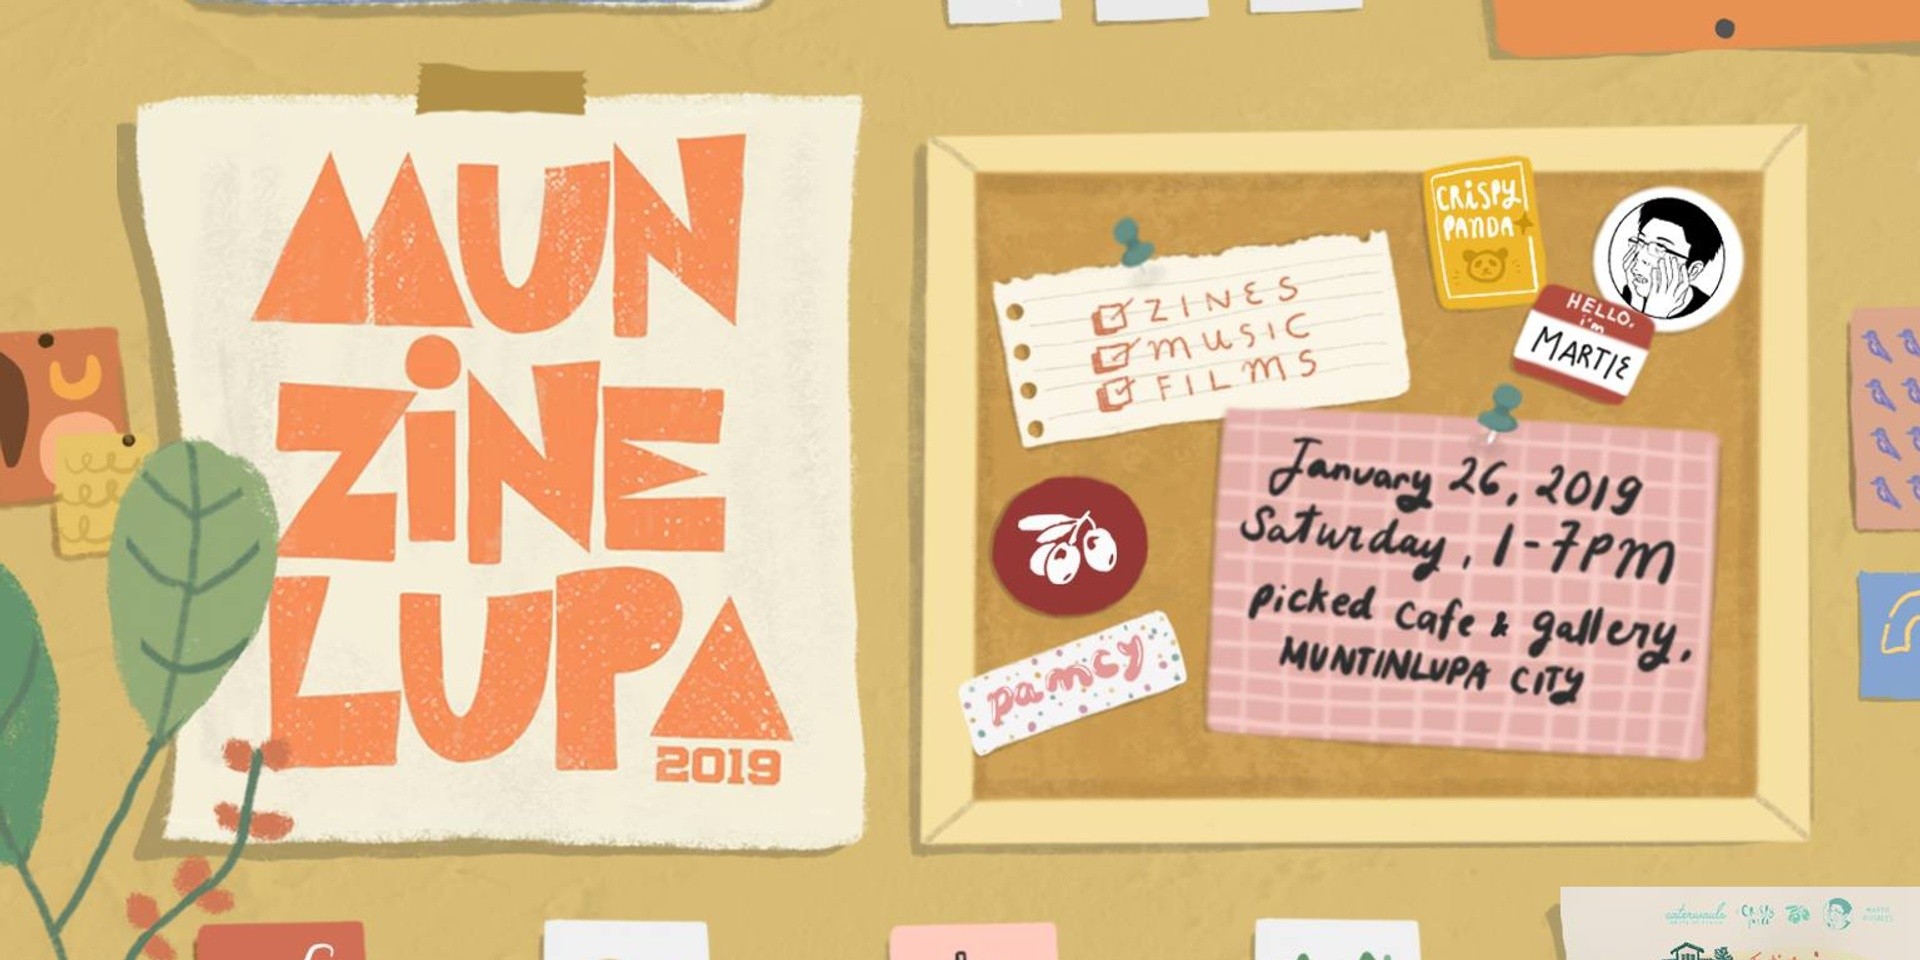 Munzinelupa to return on its second year with Bedspacer, Teenage Granny, and more